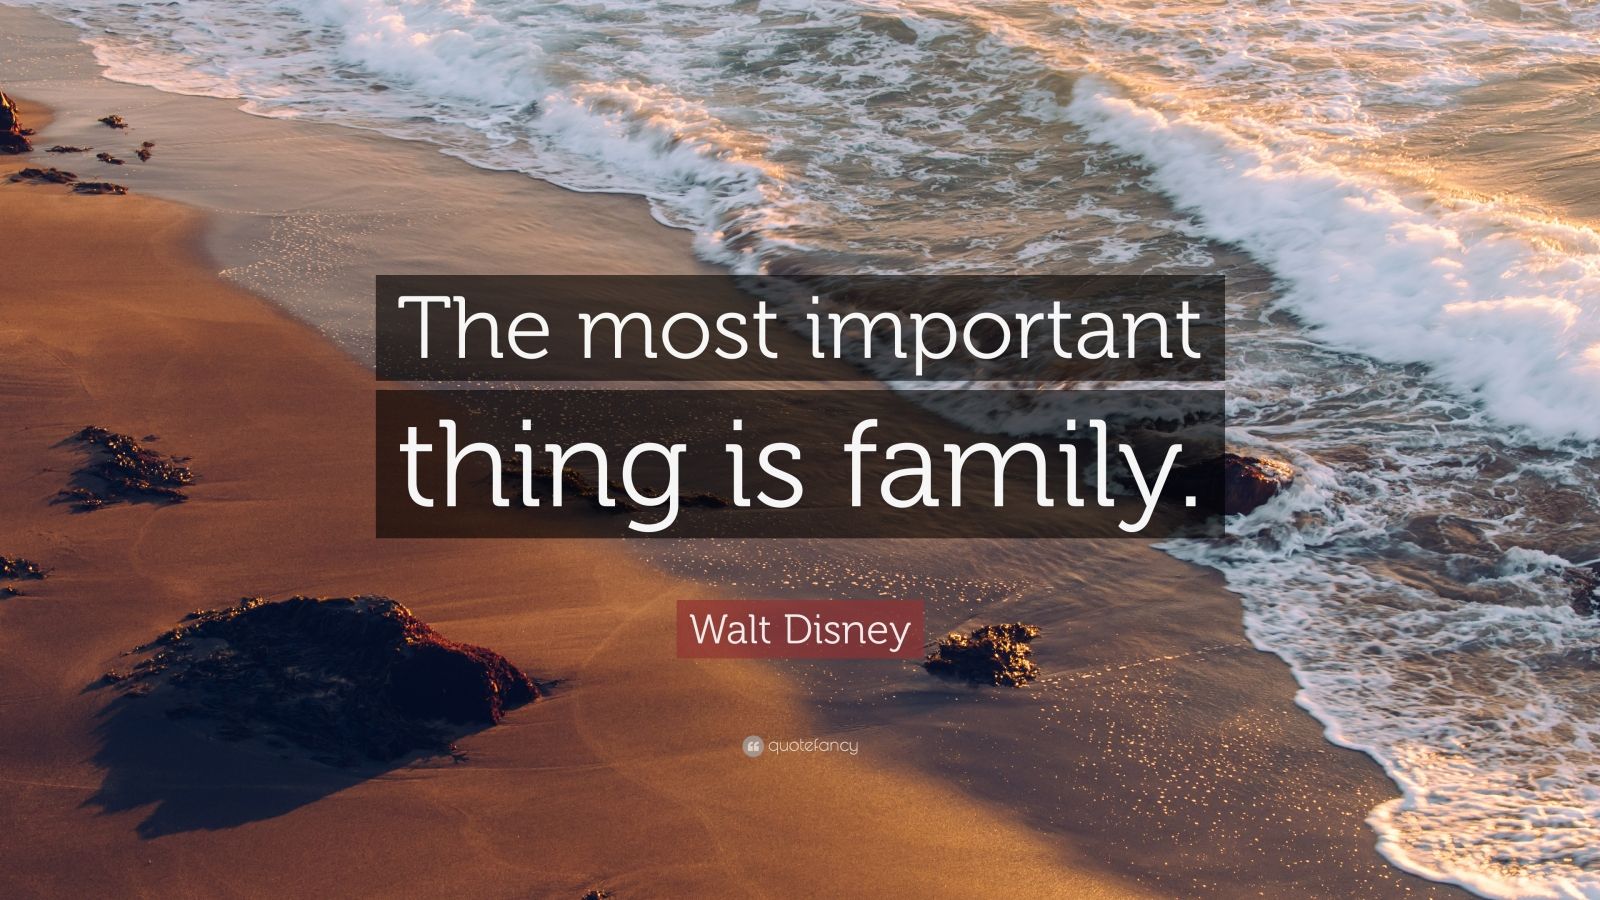 Disney Quotes About Family 35 Images Disney Quotes About Family Pin By Torey Dunning On Disney Disney Quotes Walt Walt Disney Quote The Most Important Thing Is Family